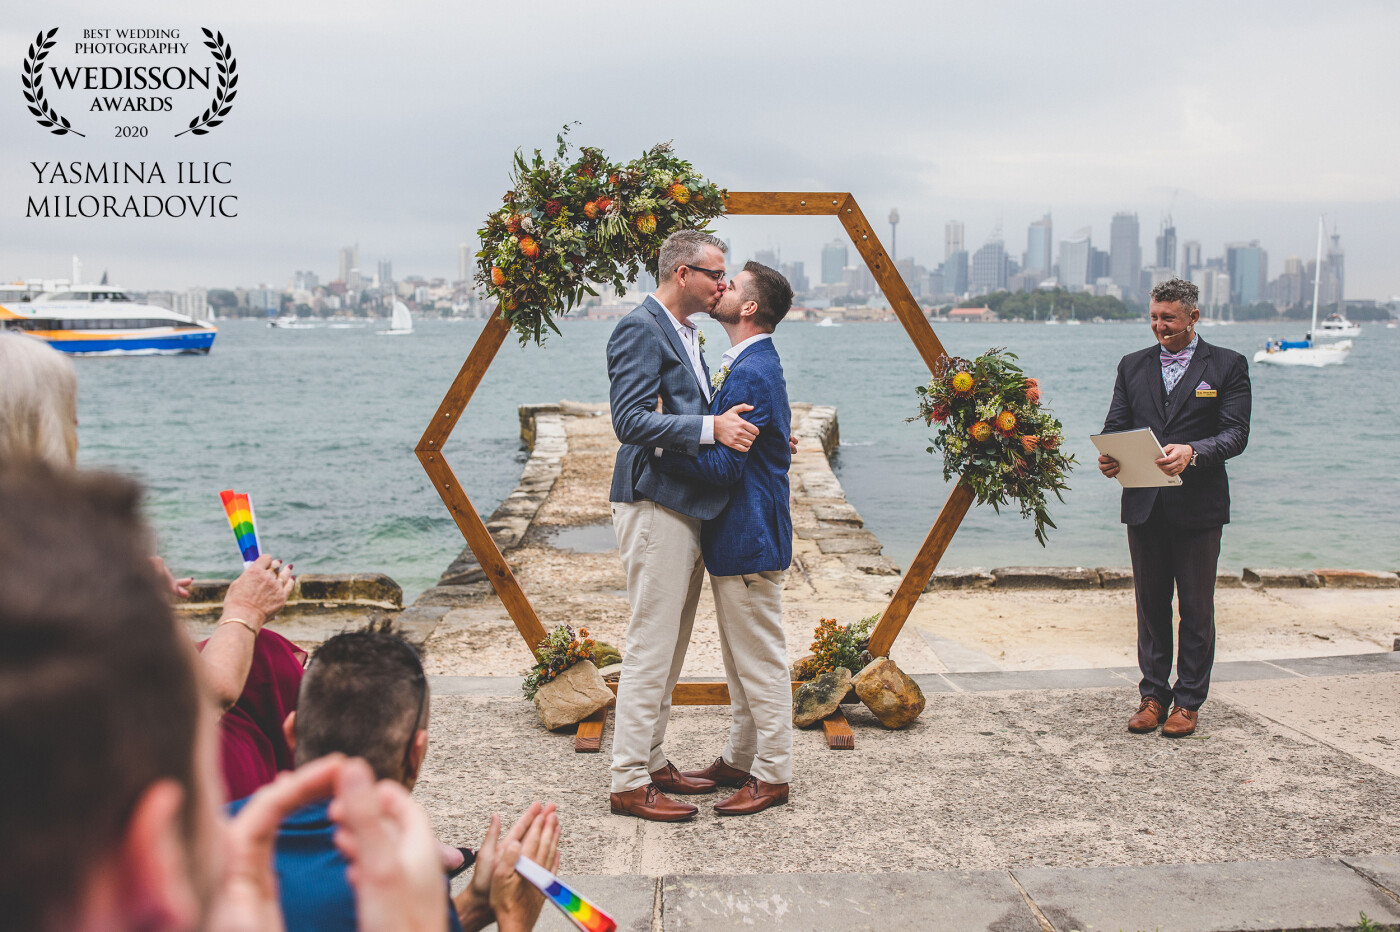 In November last year, I was lucky enough to photograph this awesome couple at Bradleys Head in Sydney. After over 15 years together, waiting for Australia to (finally) legalize same-sex marriage, they tied the knot. What a moment.